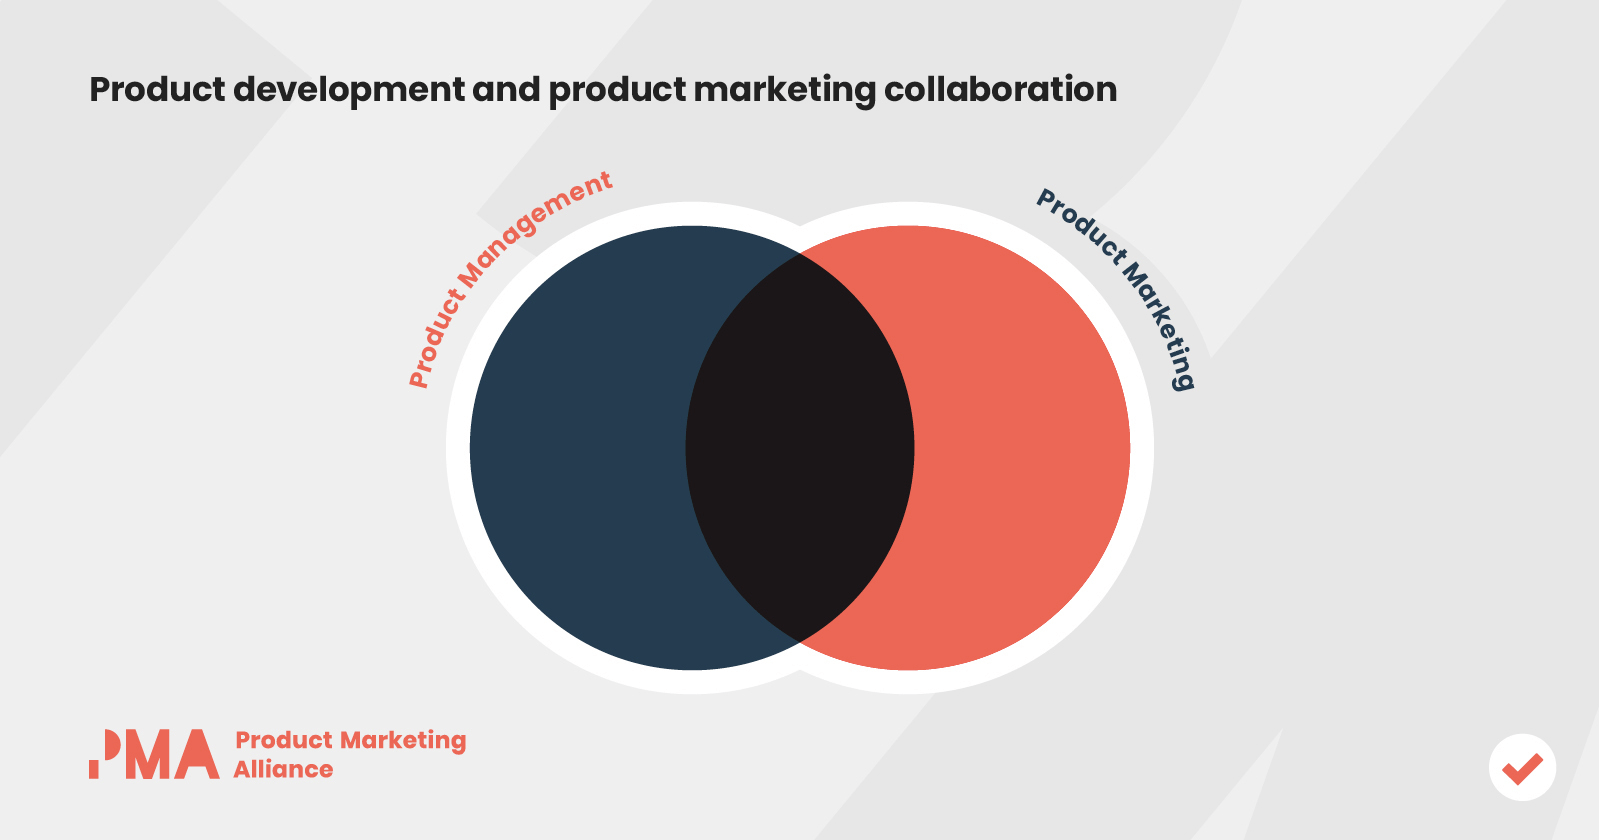 A venn diagram of product development and product marketing collaboration, showing product management as one circle and product marketing as the other, and them crossing over in the middle. 